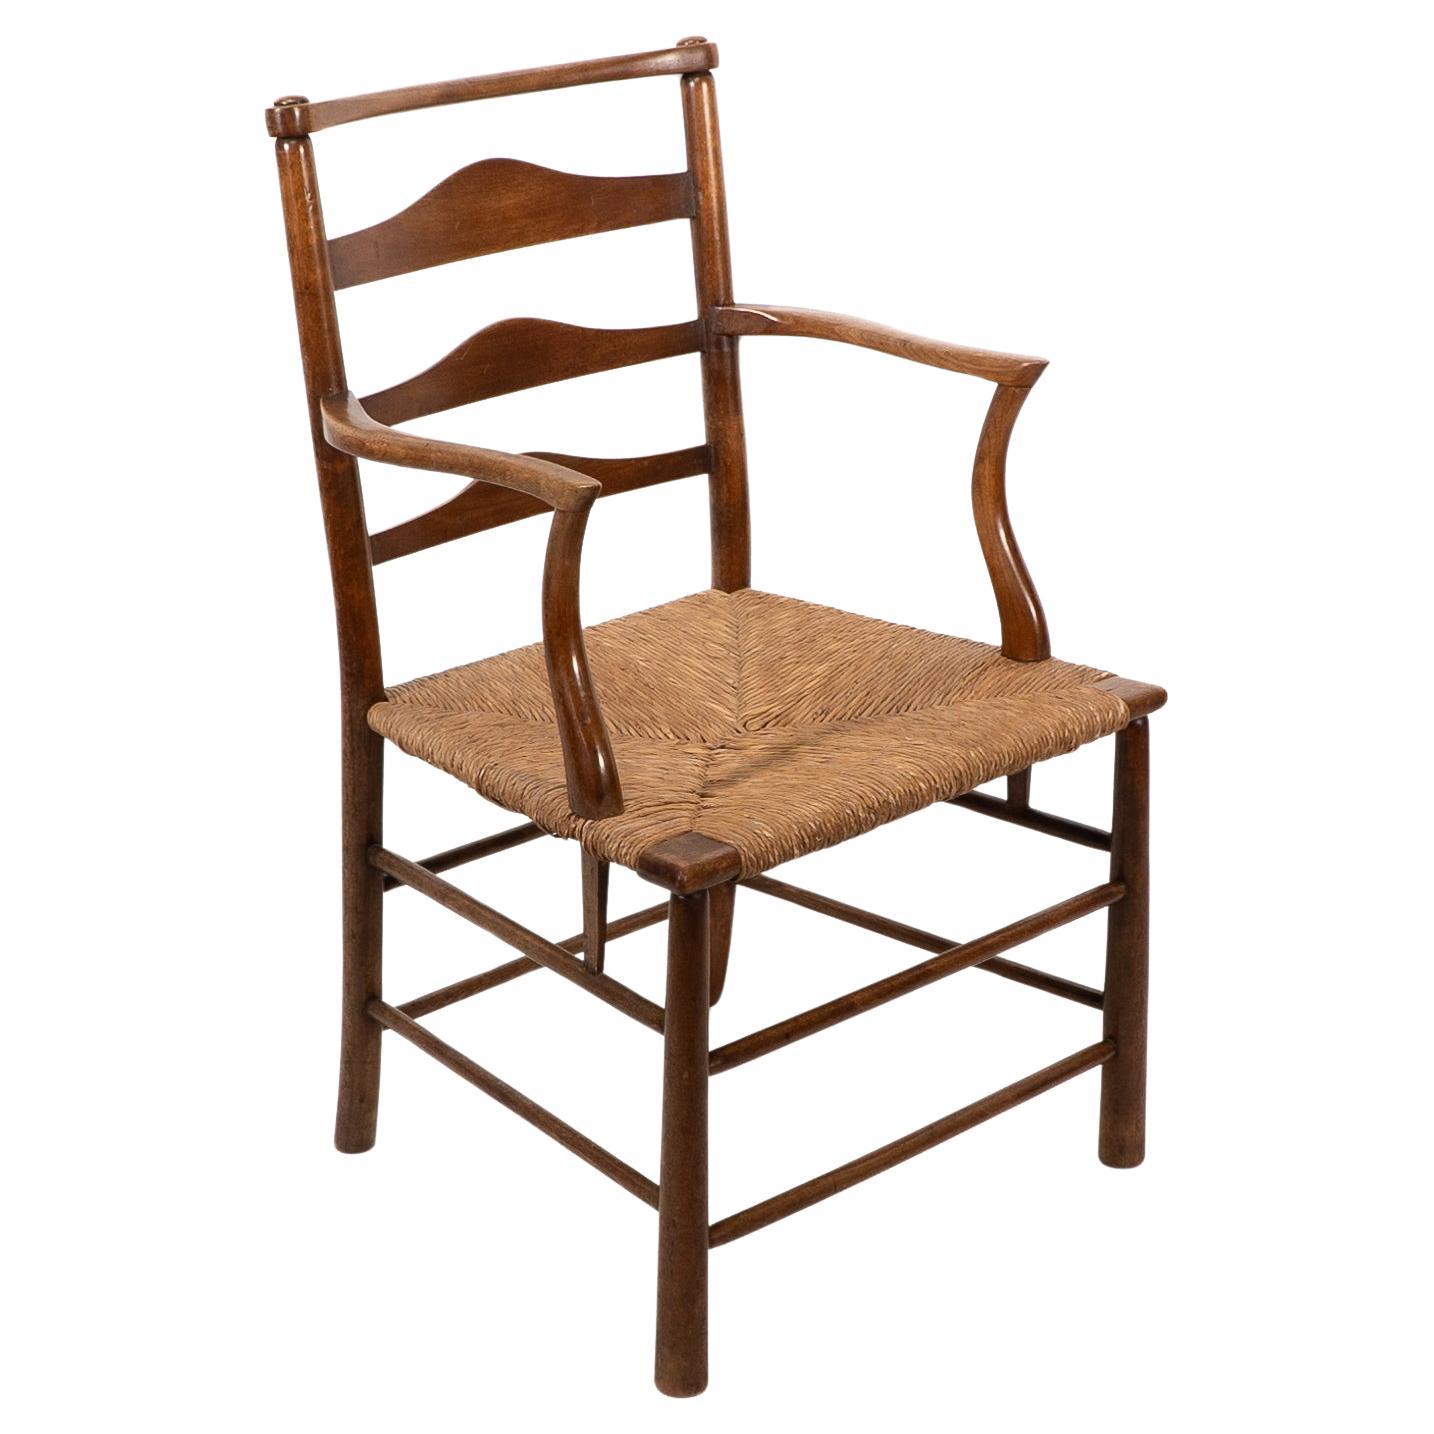 C R Ashbee. An Arts and Crafts rush seat ladder back armchair For Sale